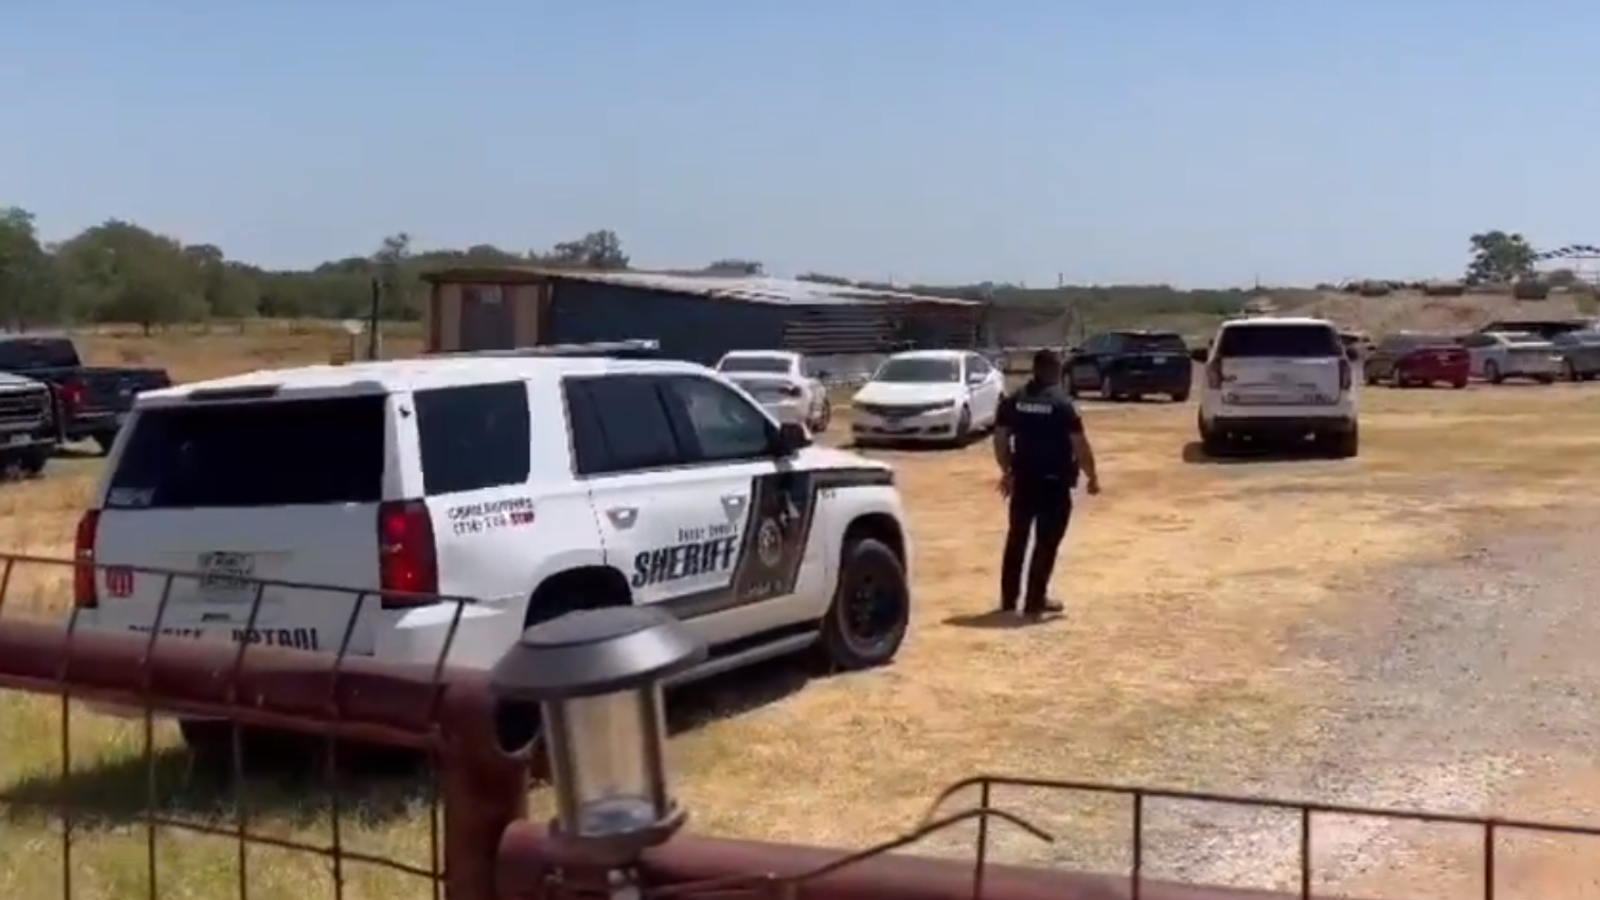 'Human remains' found in suitcase on Texas ranch